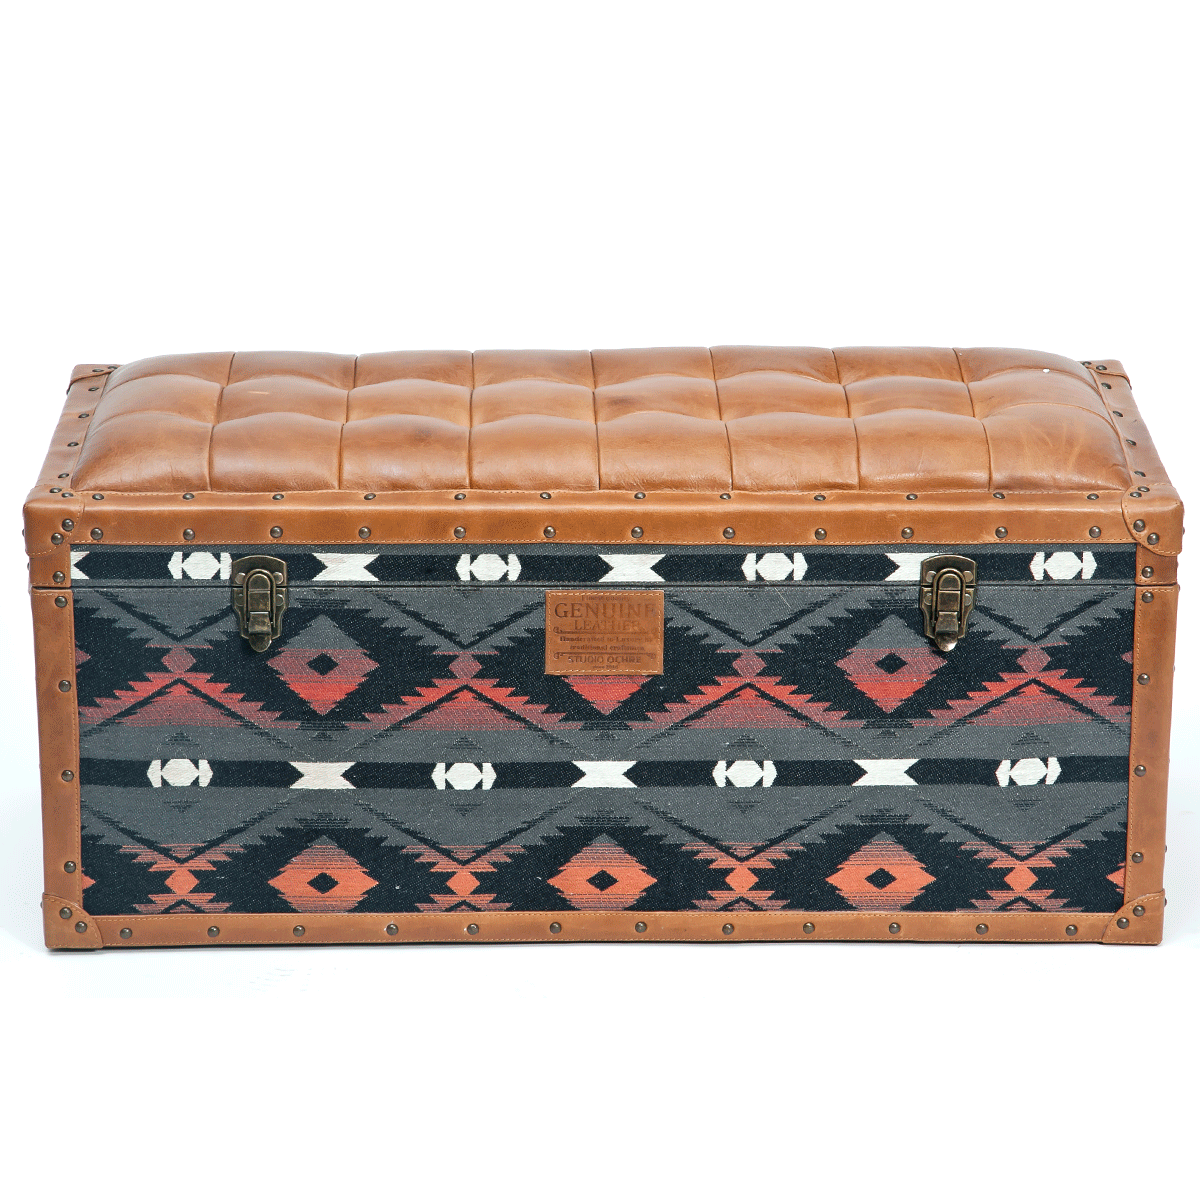 Traditional Textile Seating cum Storage Trunk